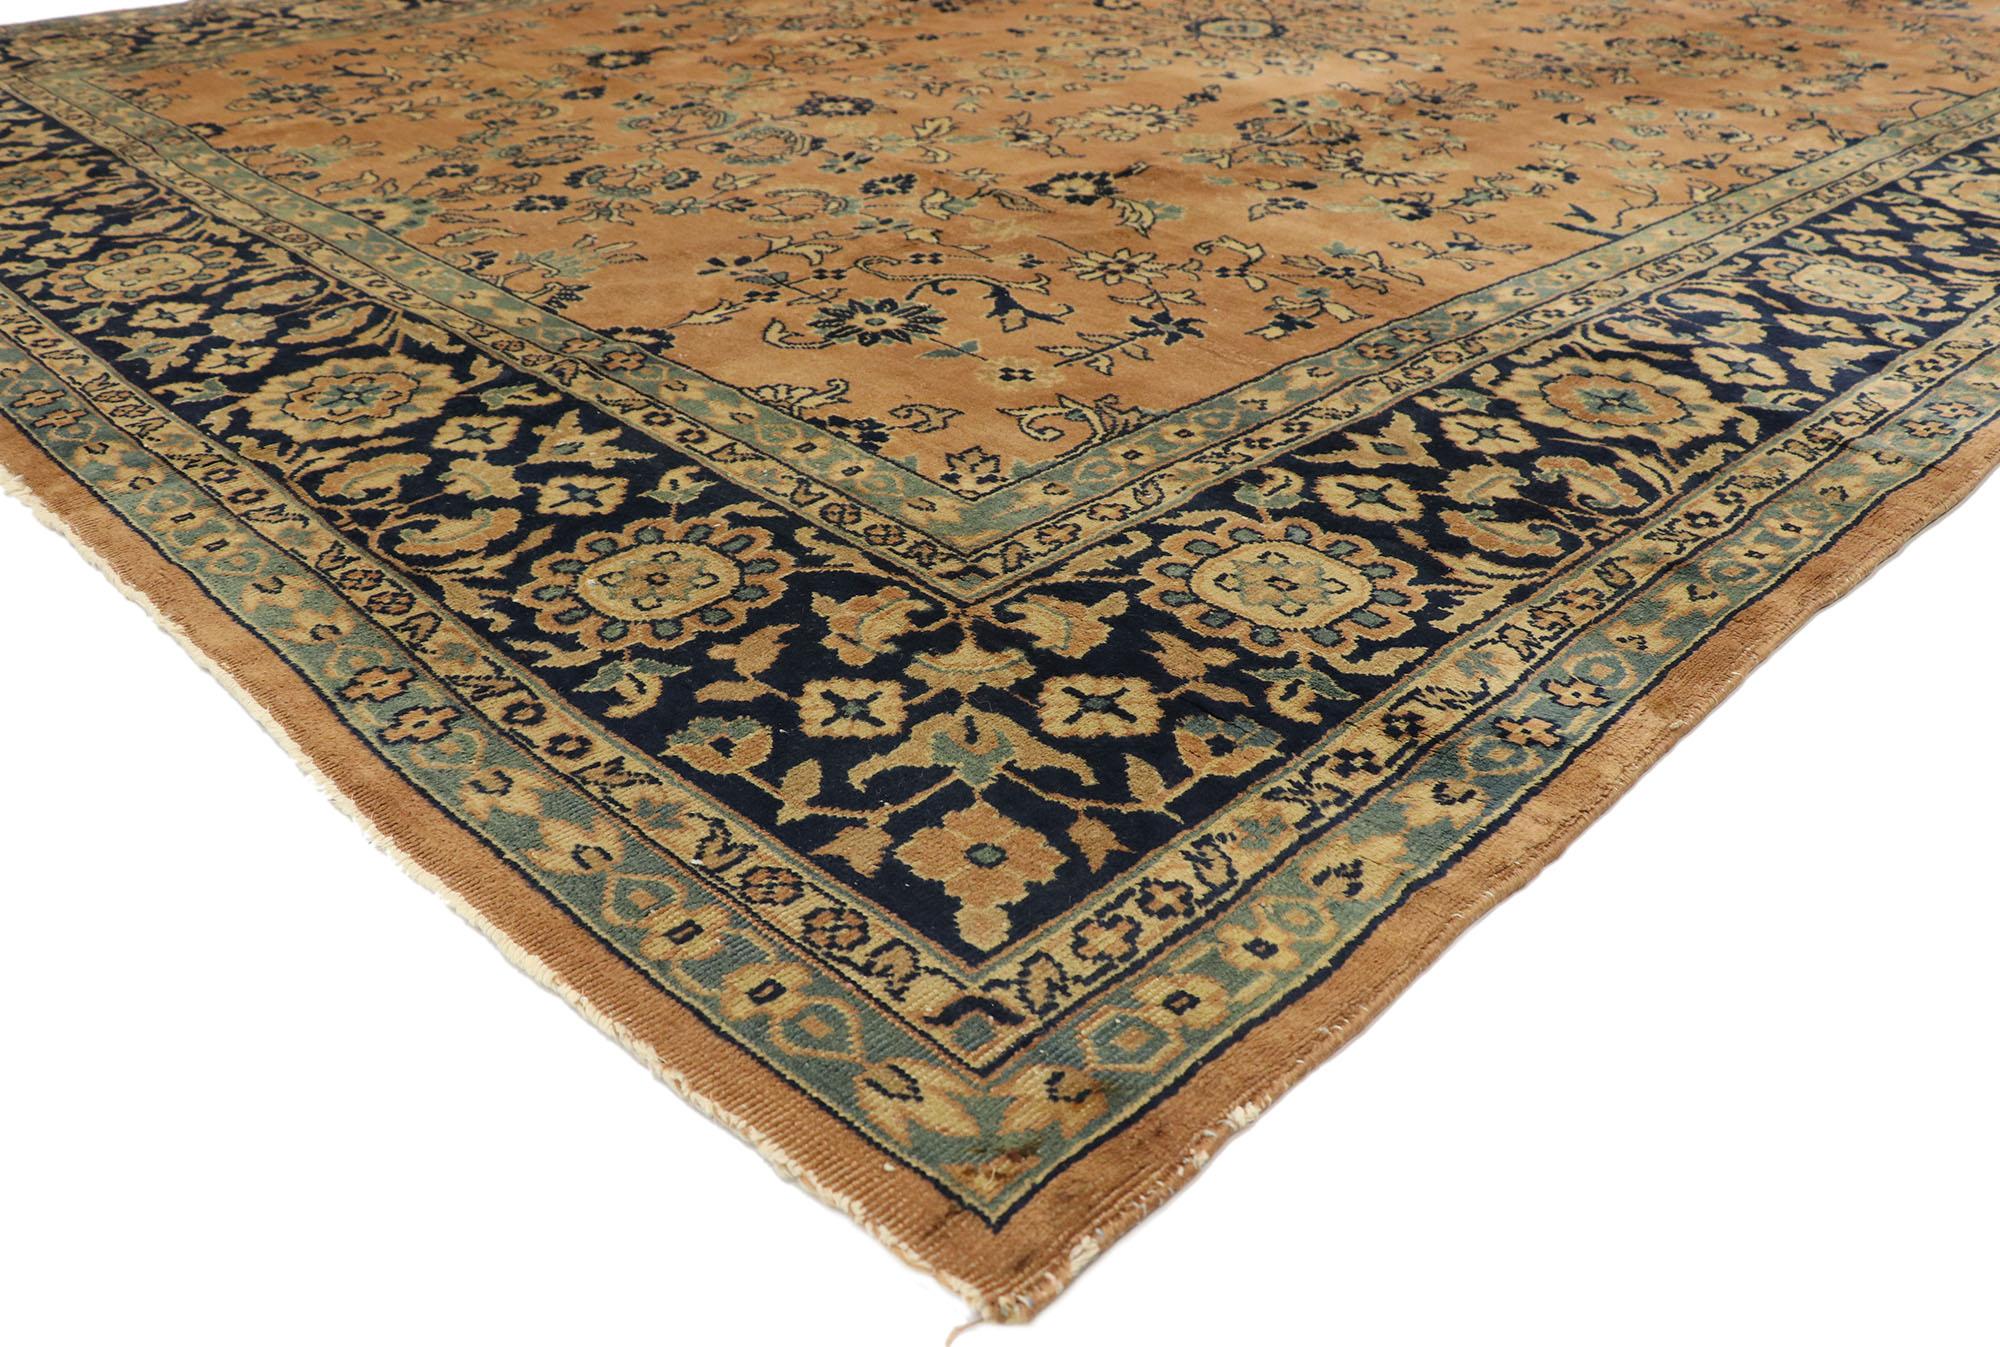 71981 Antique Indian Khorassan Rug, 08'08 x 11'10. Indian Khorassan rugs are inspired by traditional Persian rugs from the Khorassan province of northeastern Iran but are crafted in India. These rugs are known for their intricate floral and